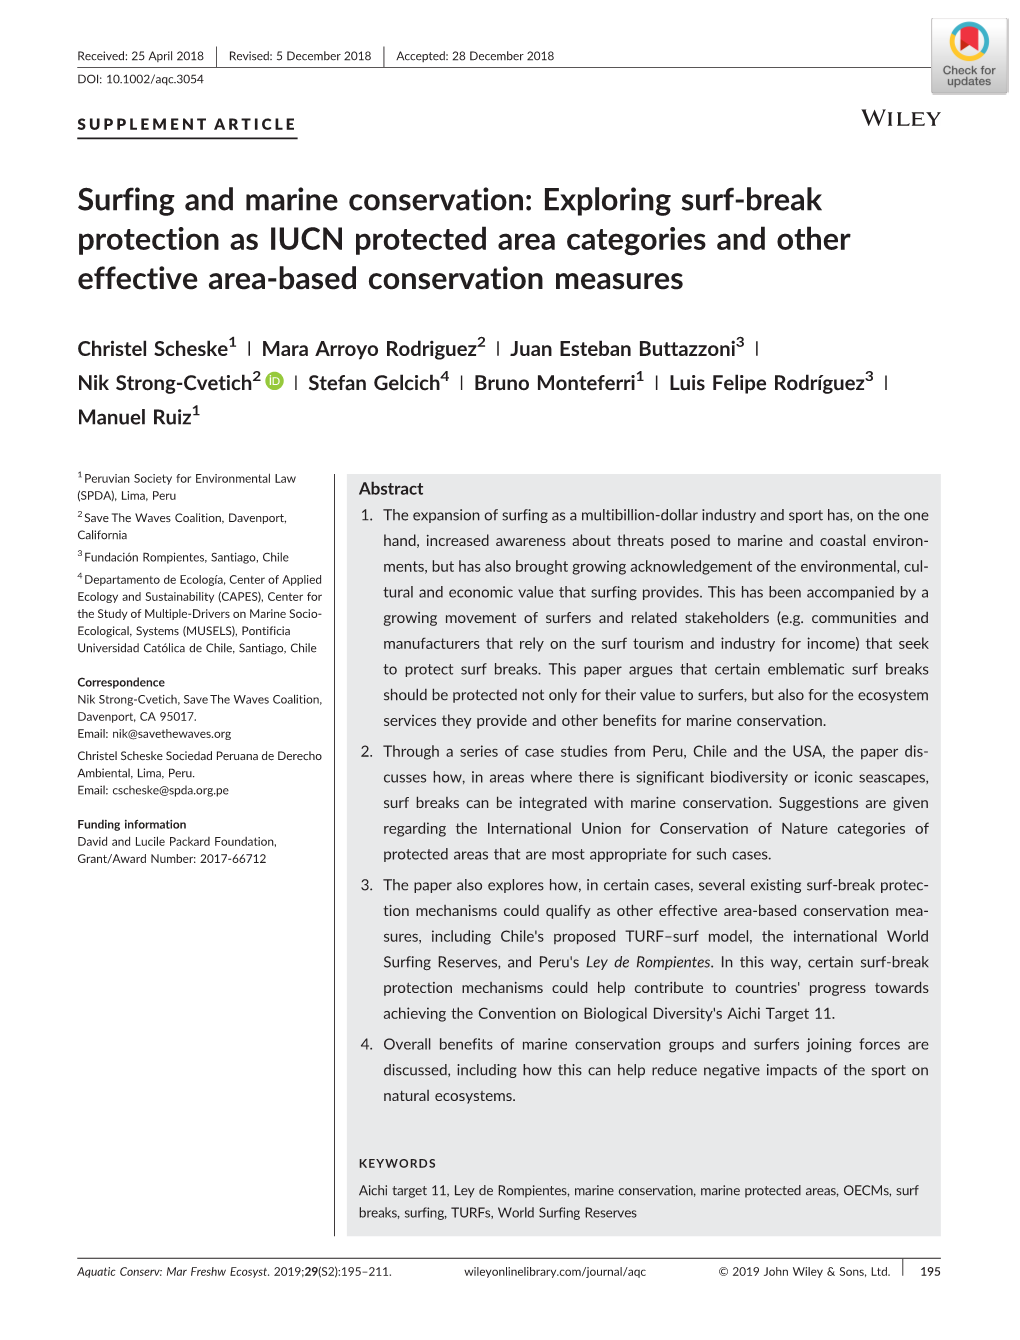 Surfing and Marine Conservation: Exploring Surf‐Break Protection As IUCN Protected Area Categories and Other Effective Area‐Based Conservation Measures